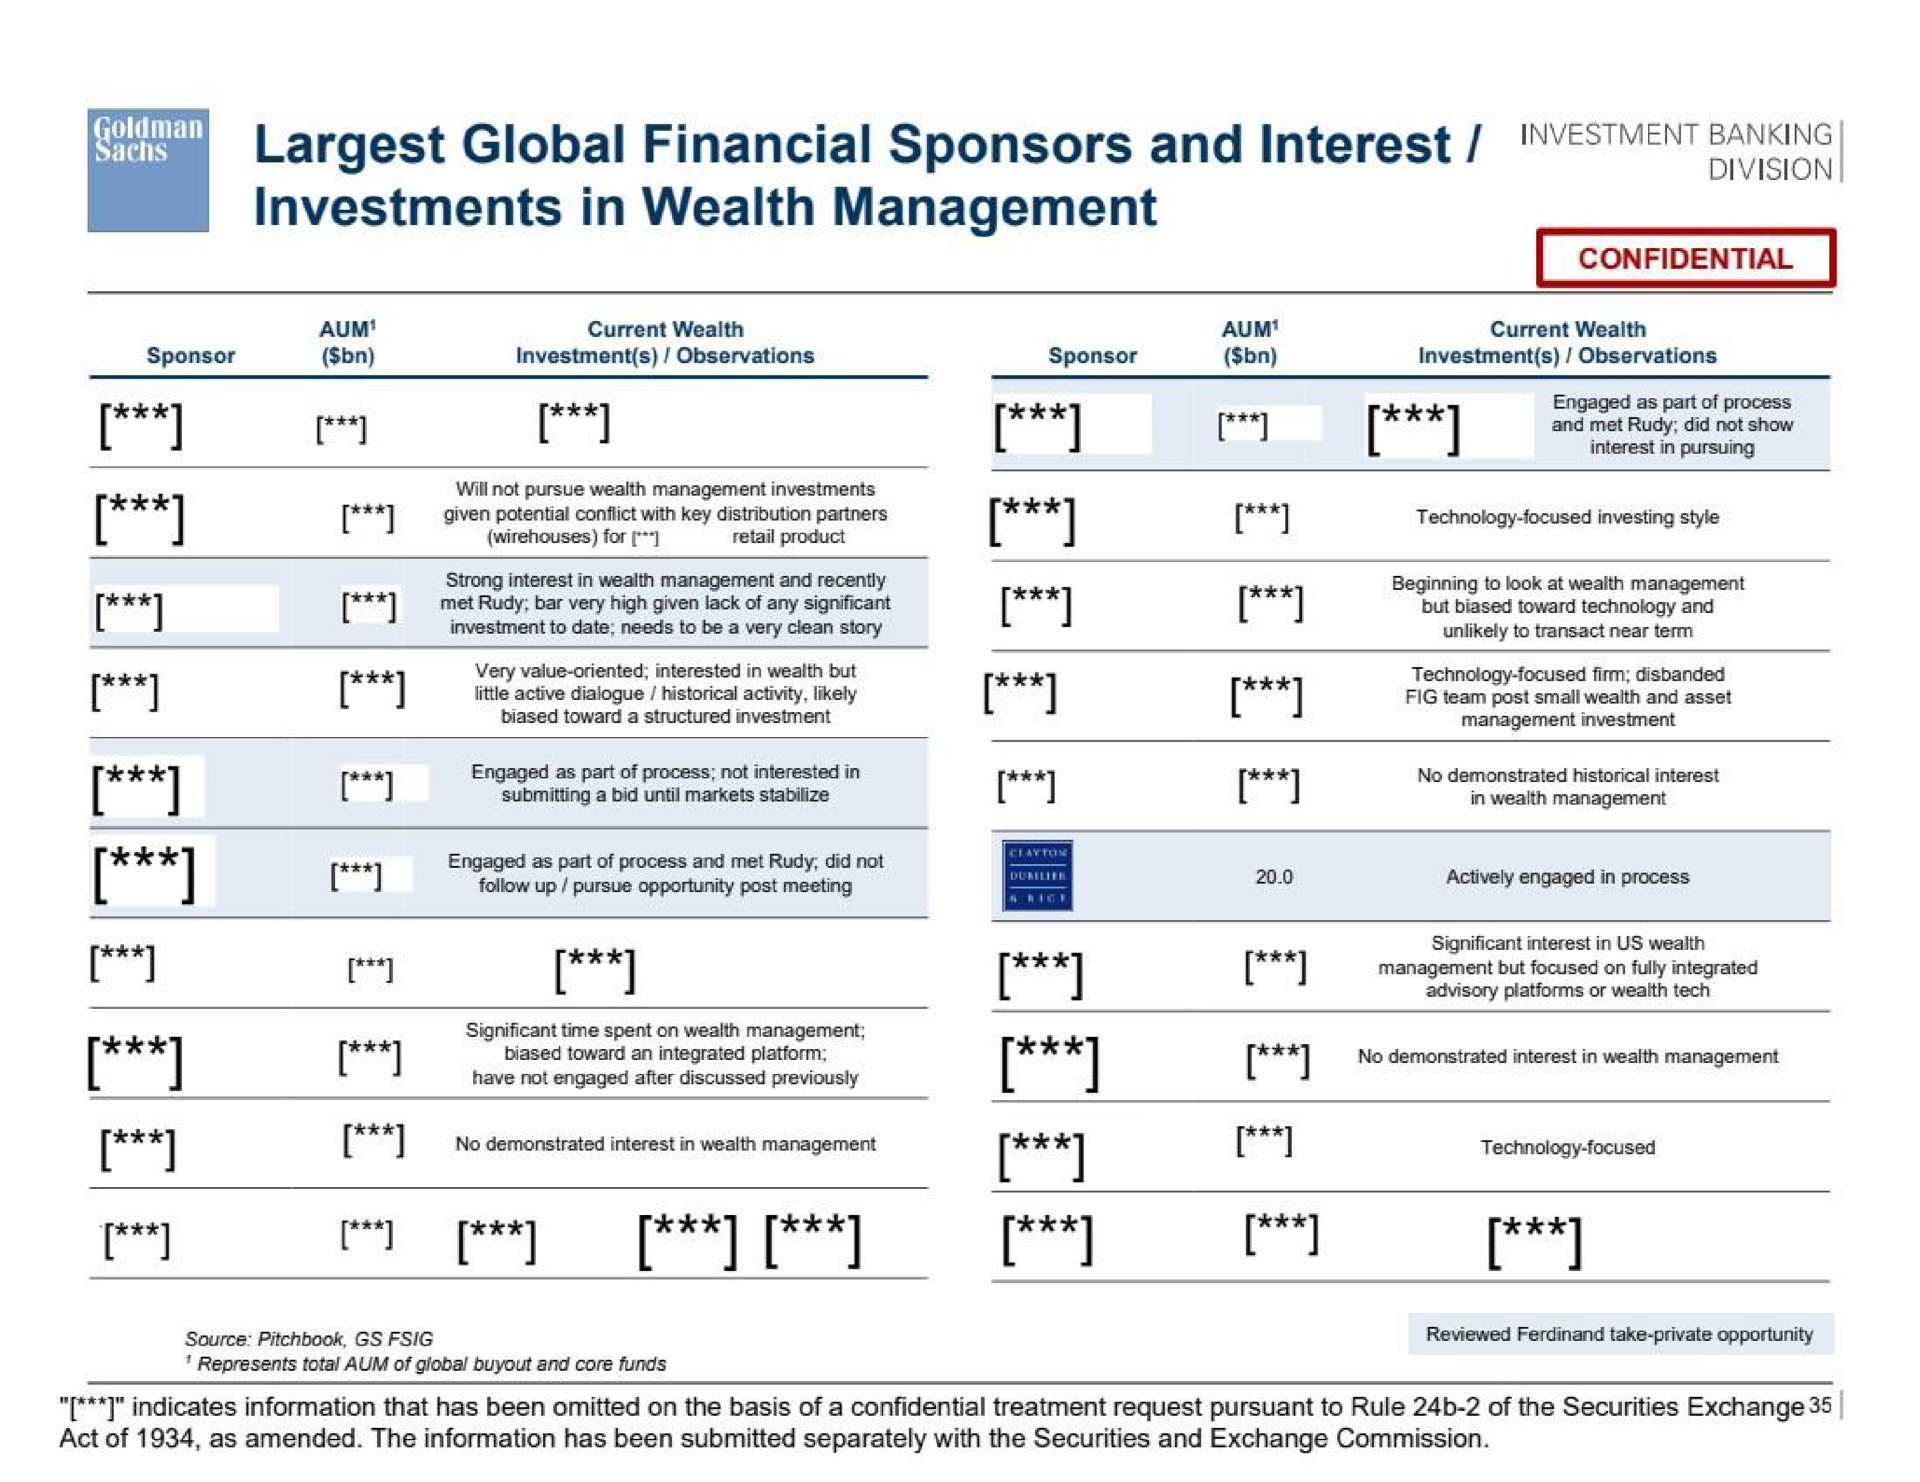 global financial sponsors and interest investments in wealth management | Goldman Sachs